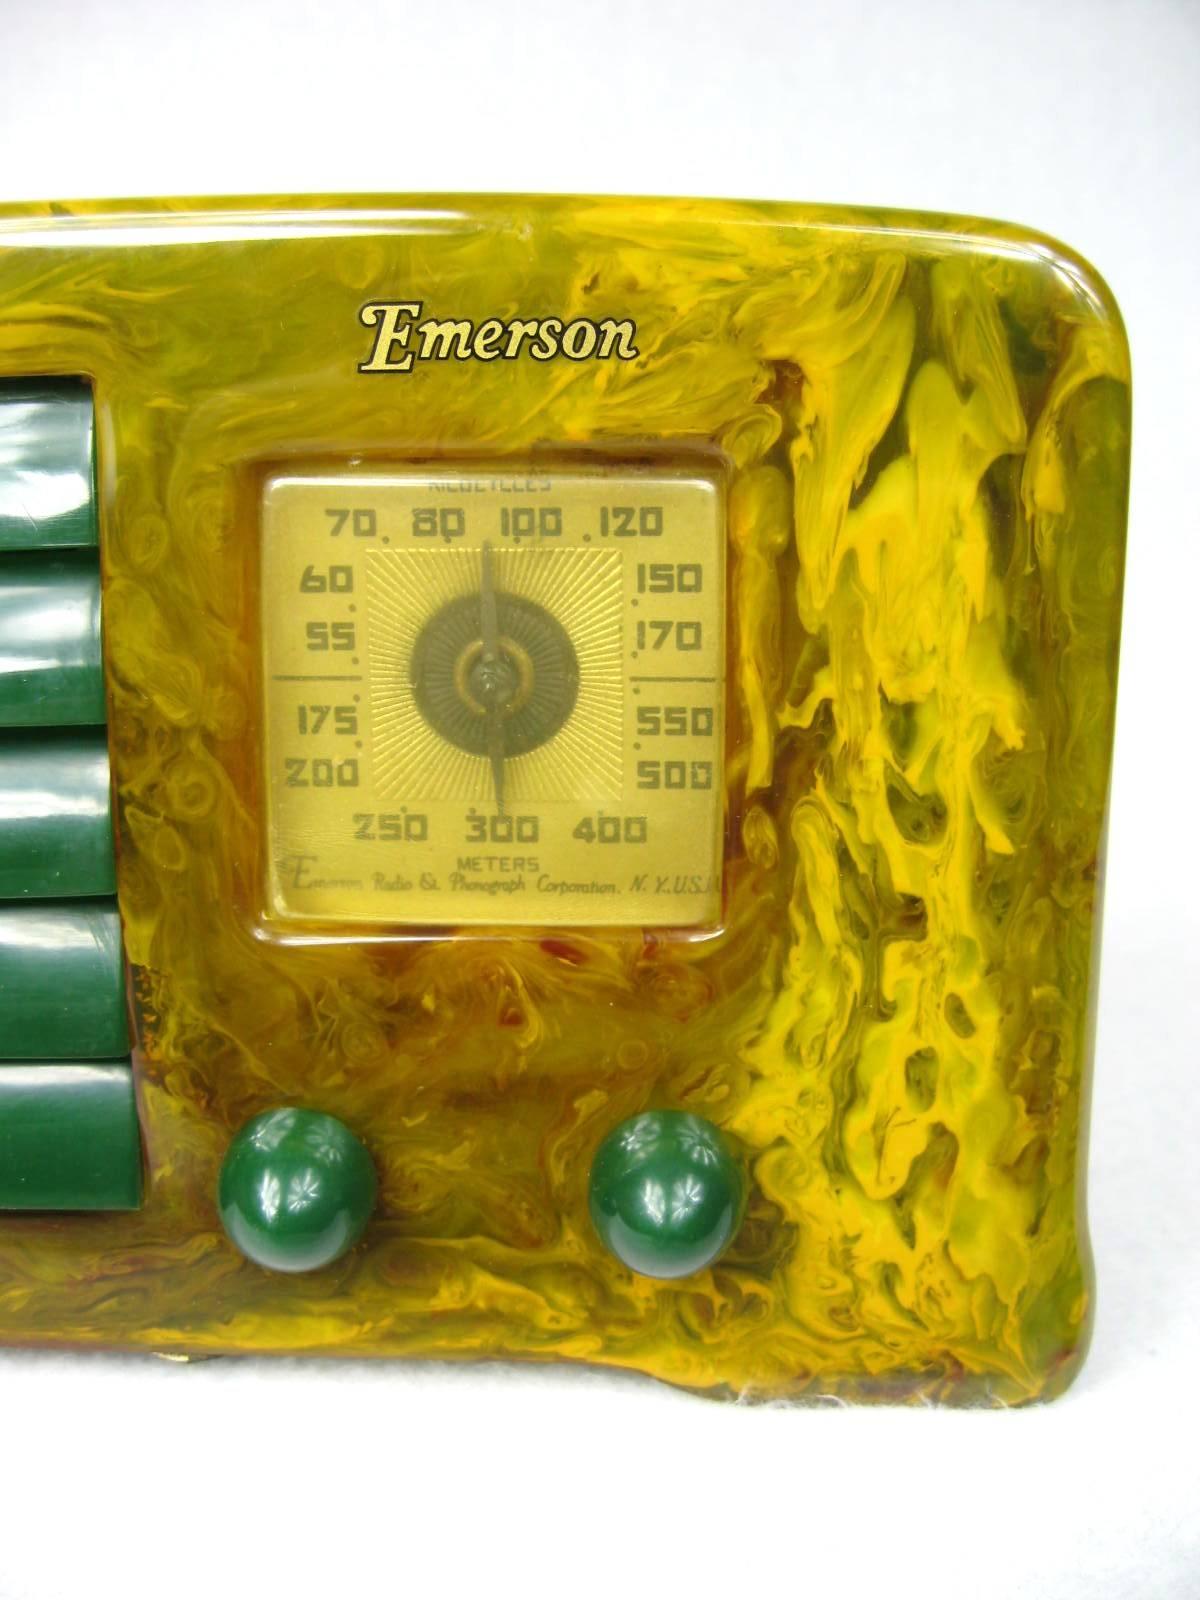 1938 Emerson Art Deco radio, light green, brown and yellow marbleized case, with original green trim. The radio is original and has it's original green back. It is in excellent condition, no cracks, no chips, no breaks, no repairs and no spray paint.